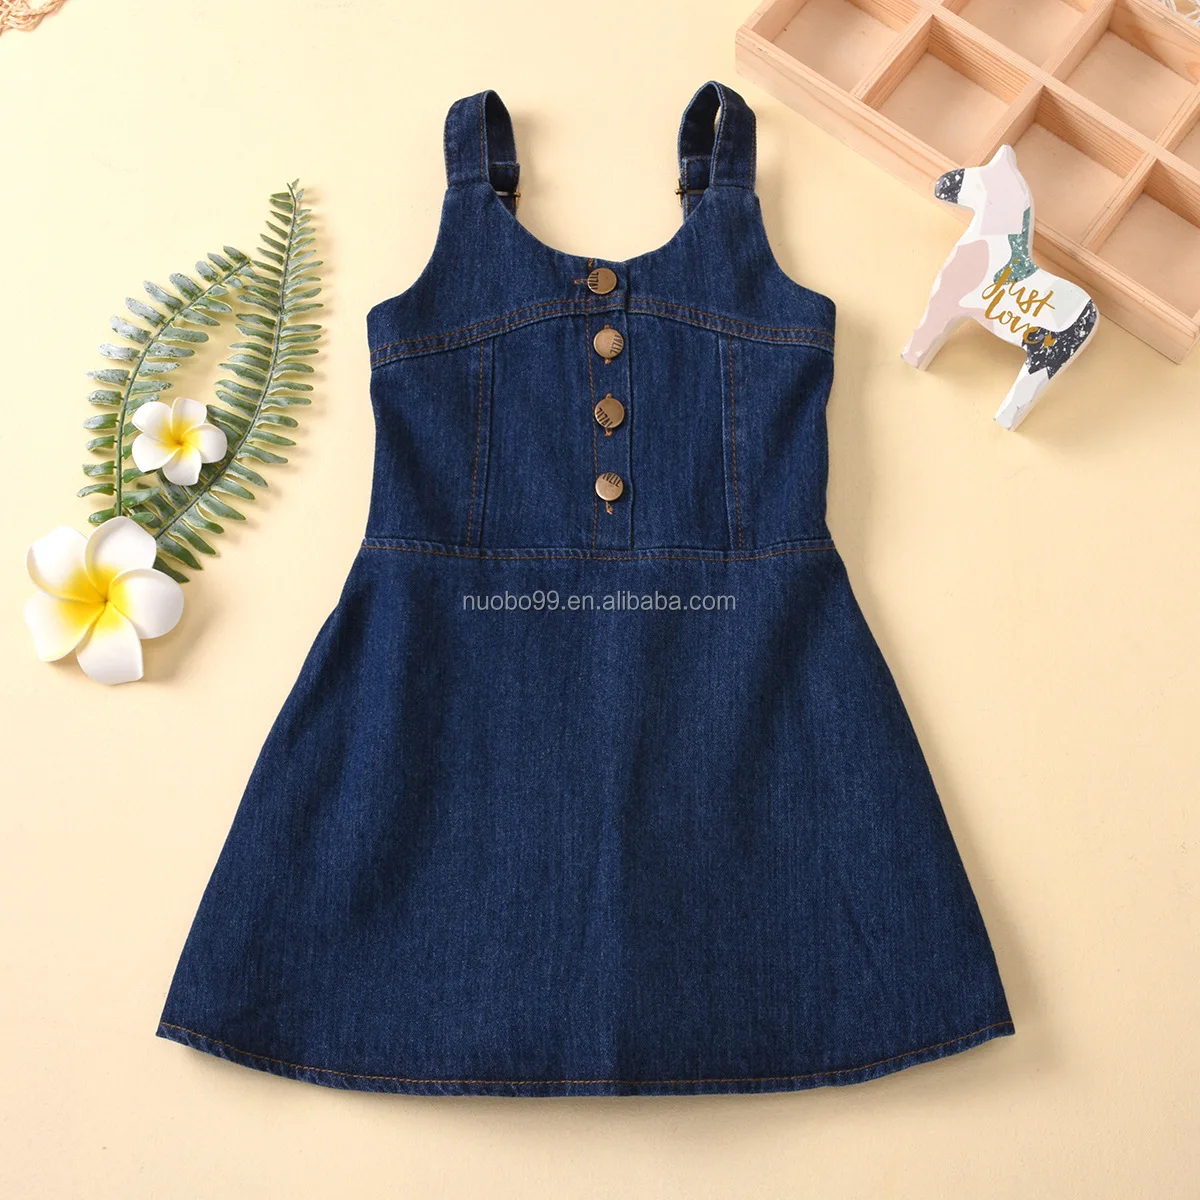 Onefa Infant Baby Clothes Toddler Kids Baby Girls Floral Print Sleeveless Shirt Tops Denim Dress Outfits Set Clothes 